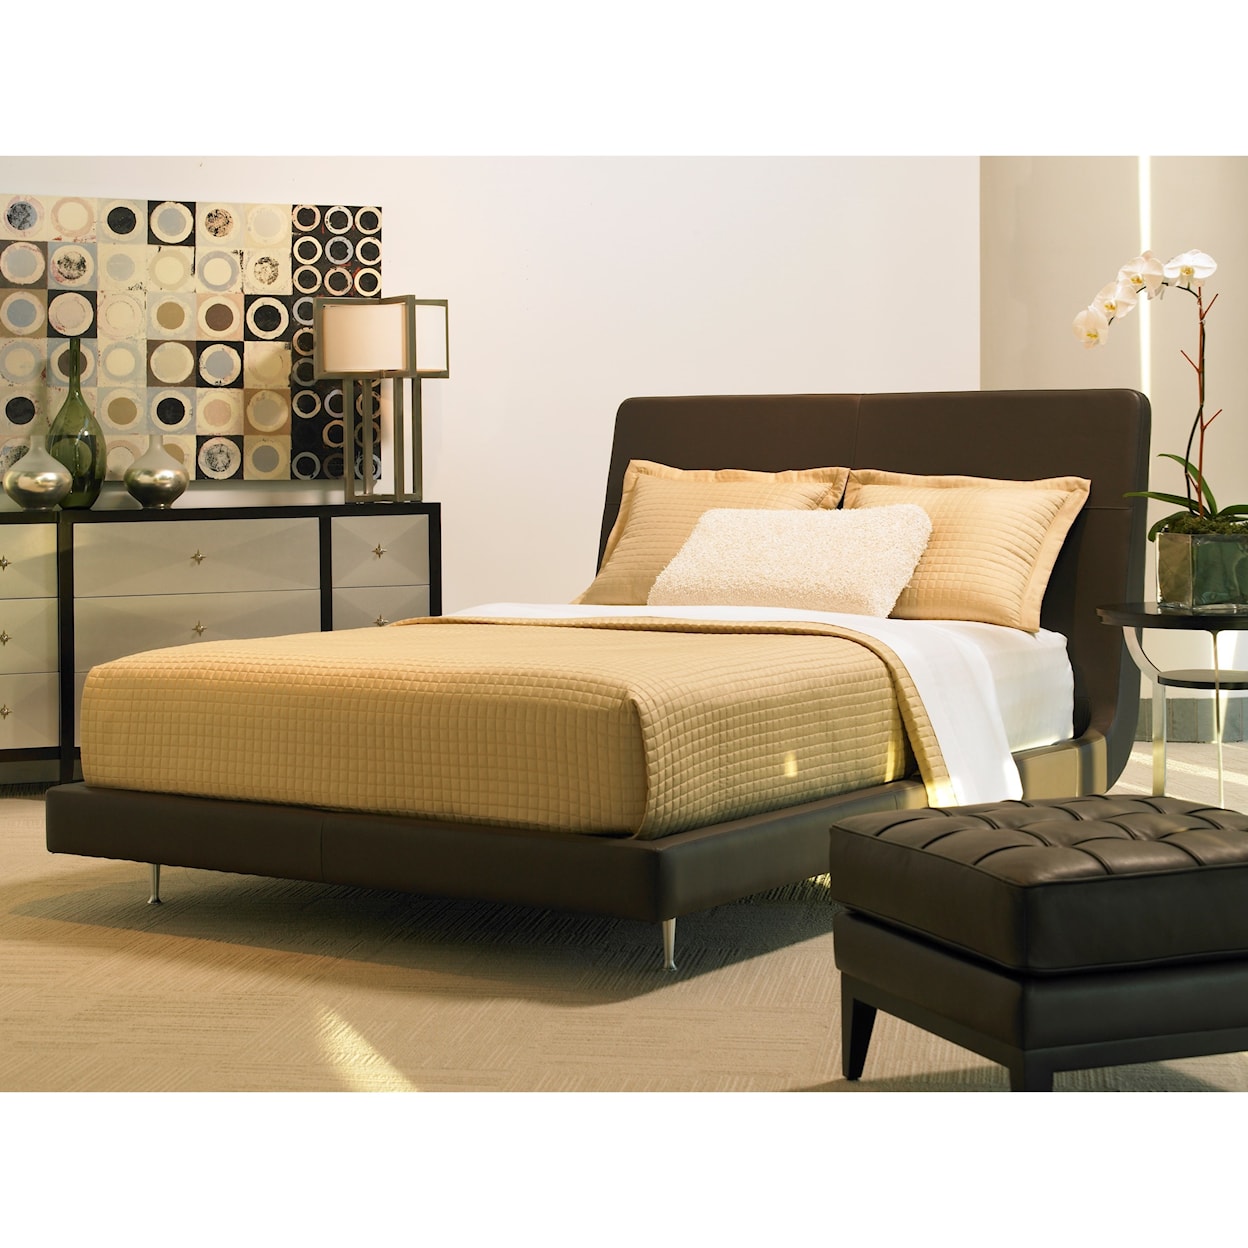 American Leather Menlo Park Bed King Upholstered Bed